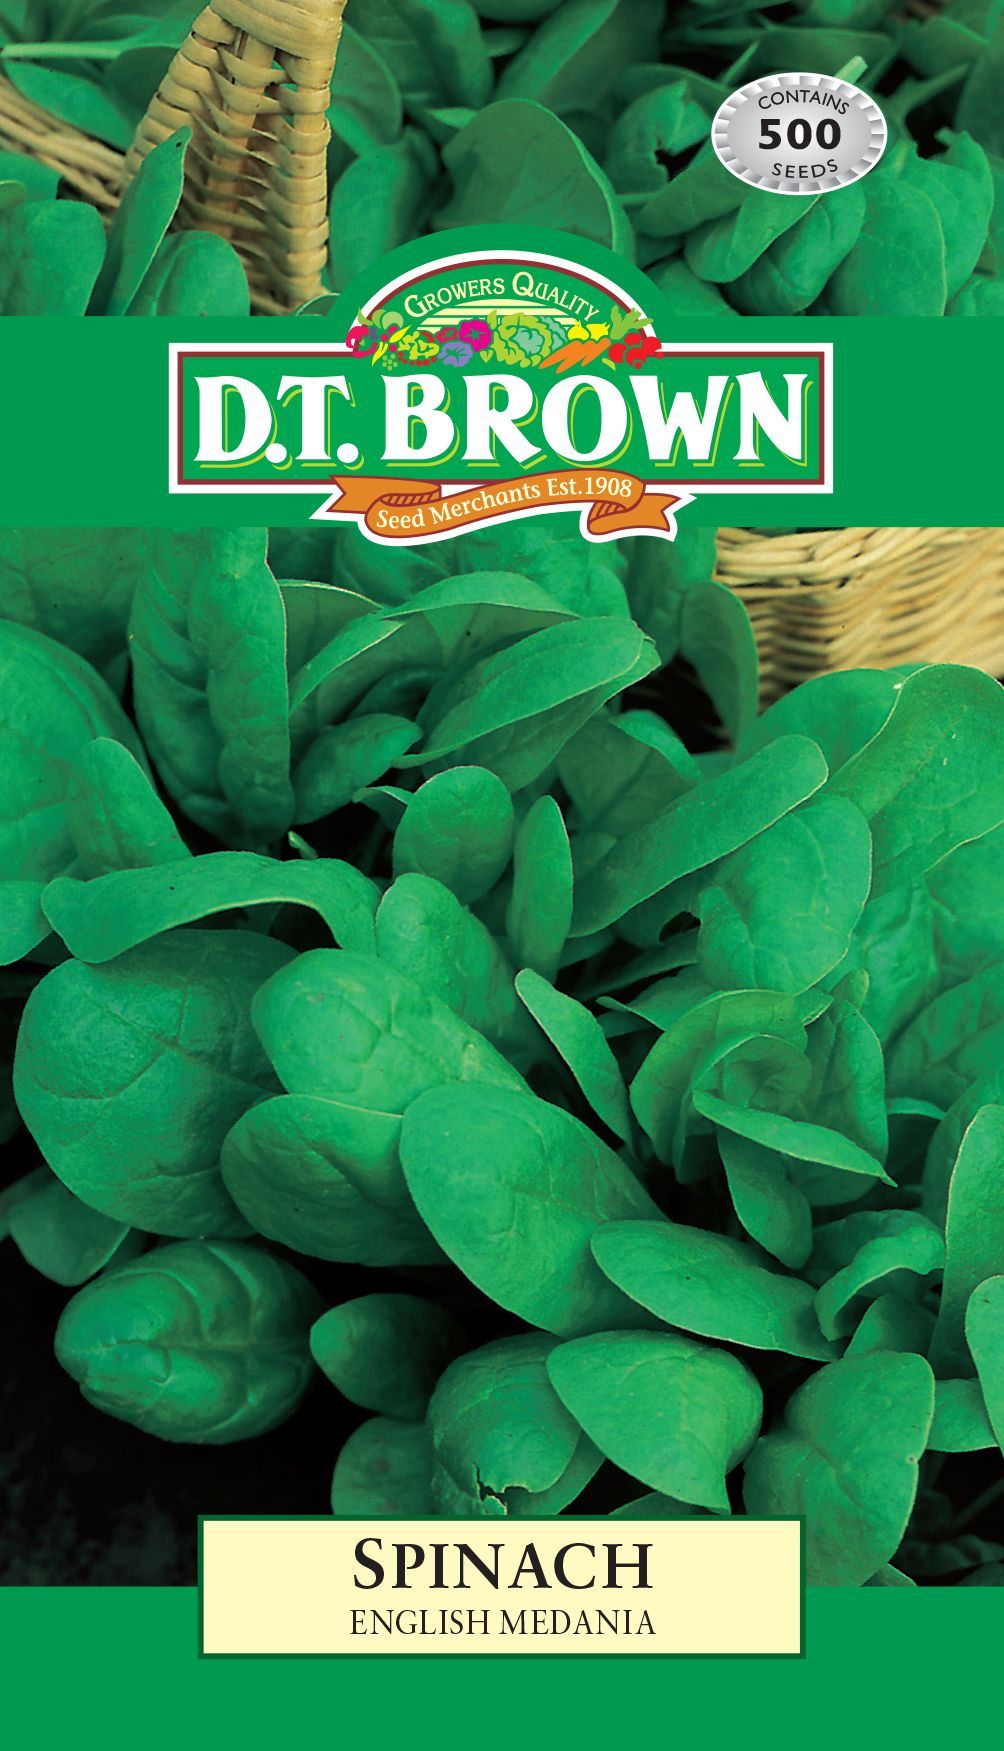 DT Brown Spinach English Medania - Woonona Petfood & Produce